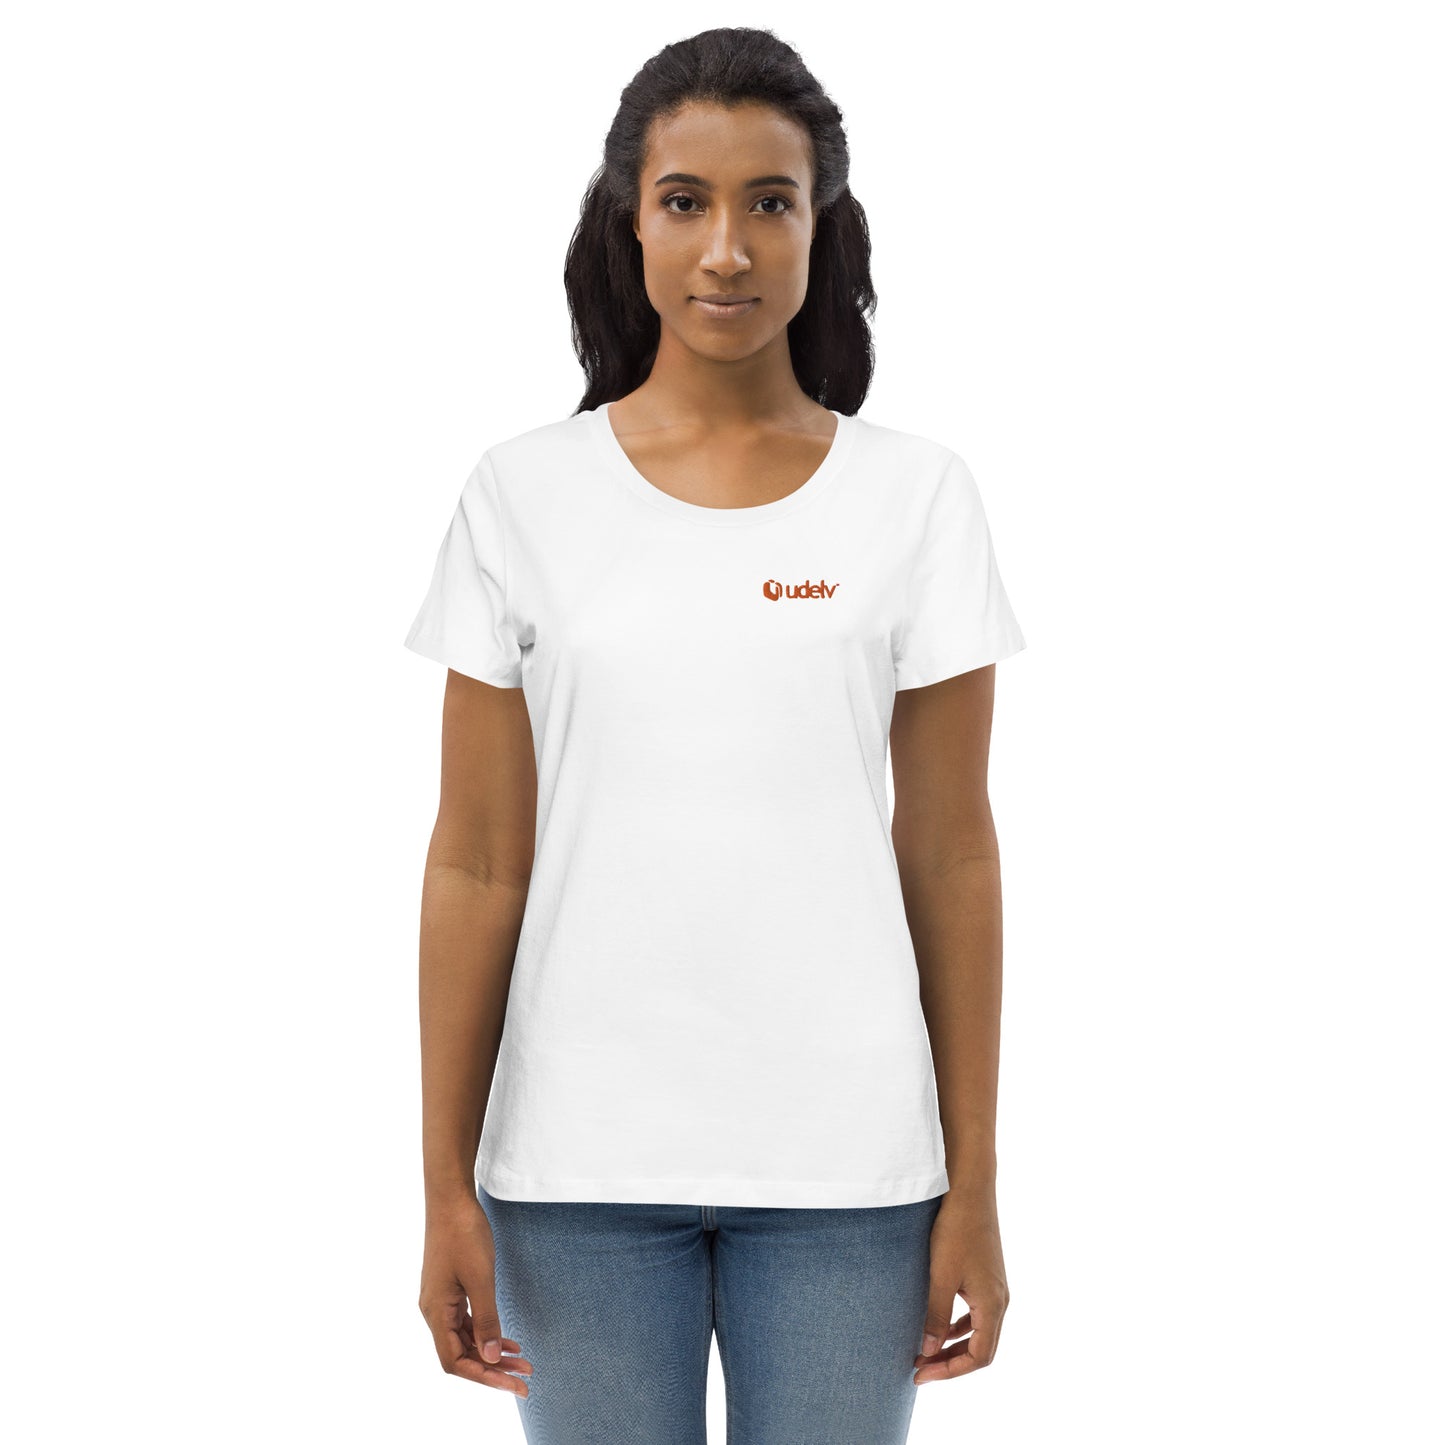 Udelv Women's Fitted Eco Tee